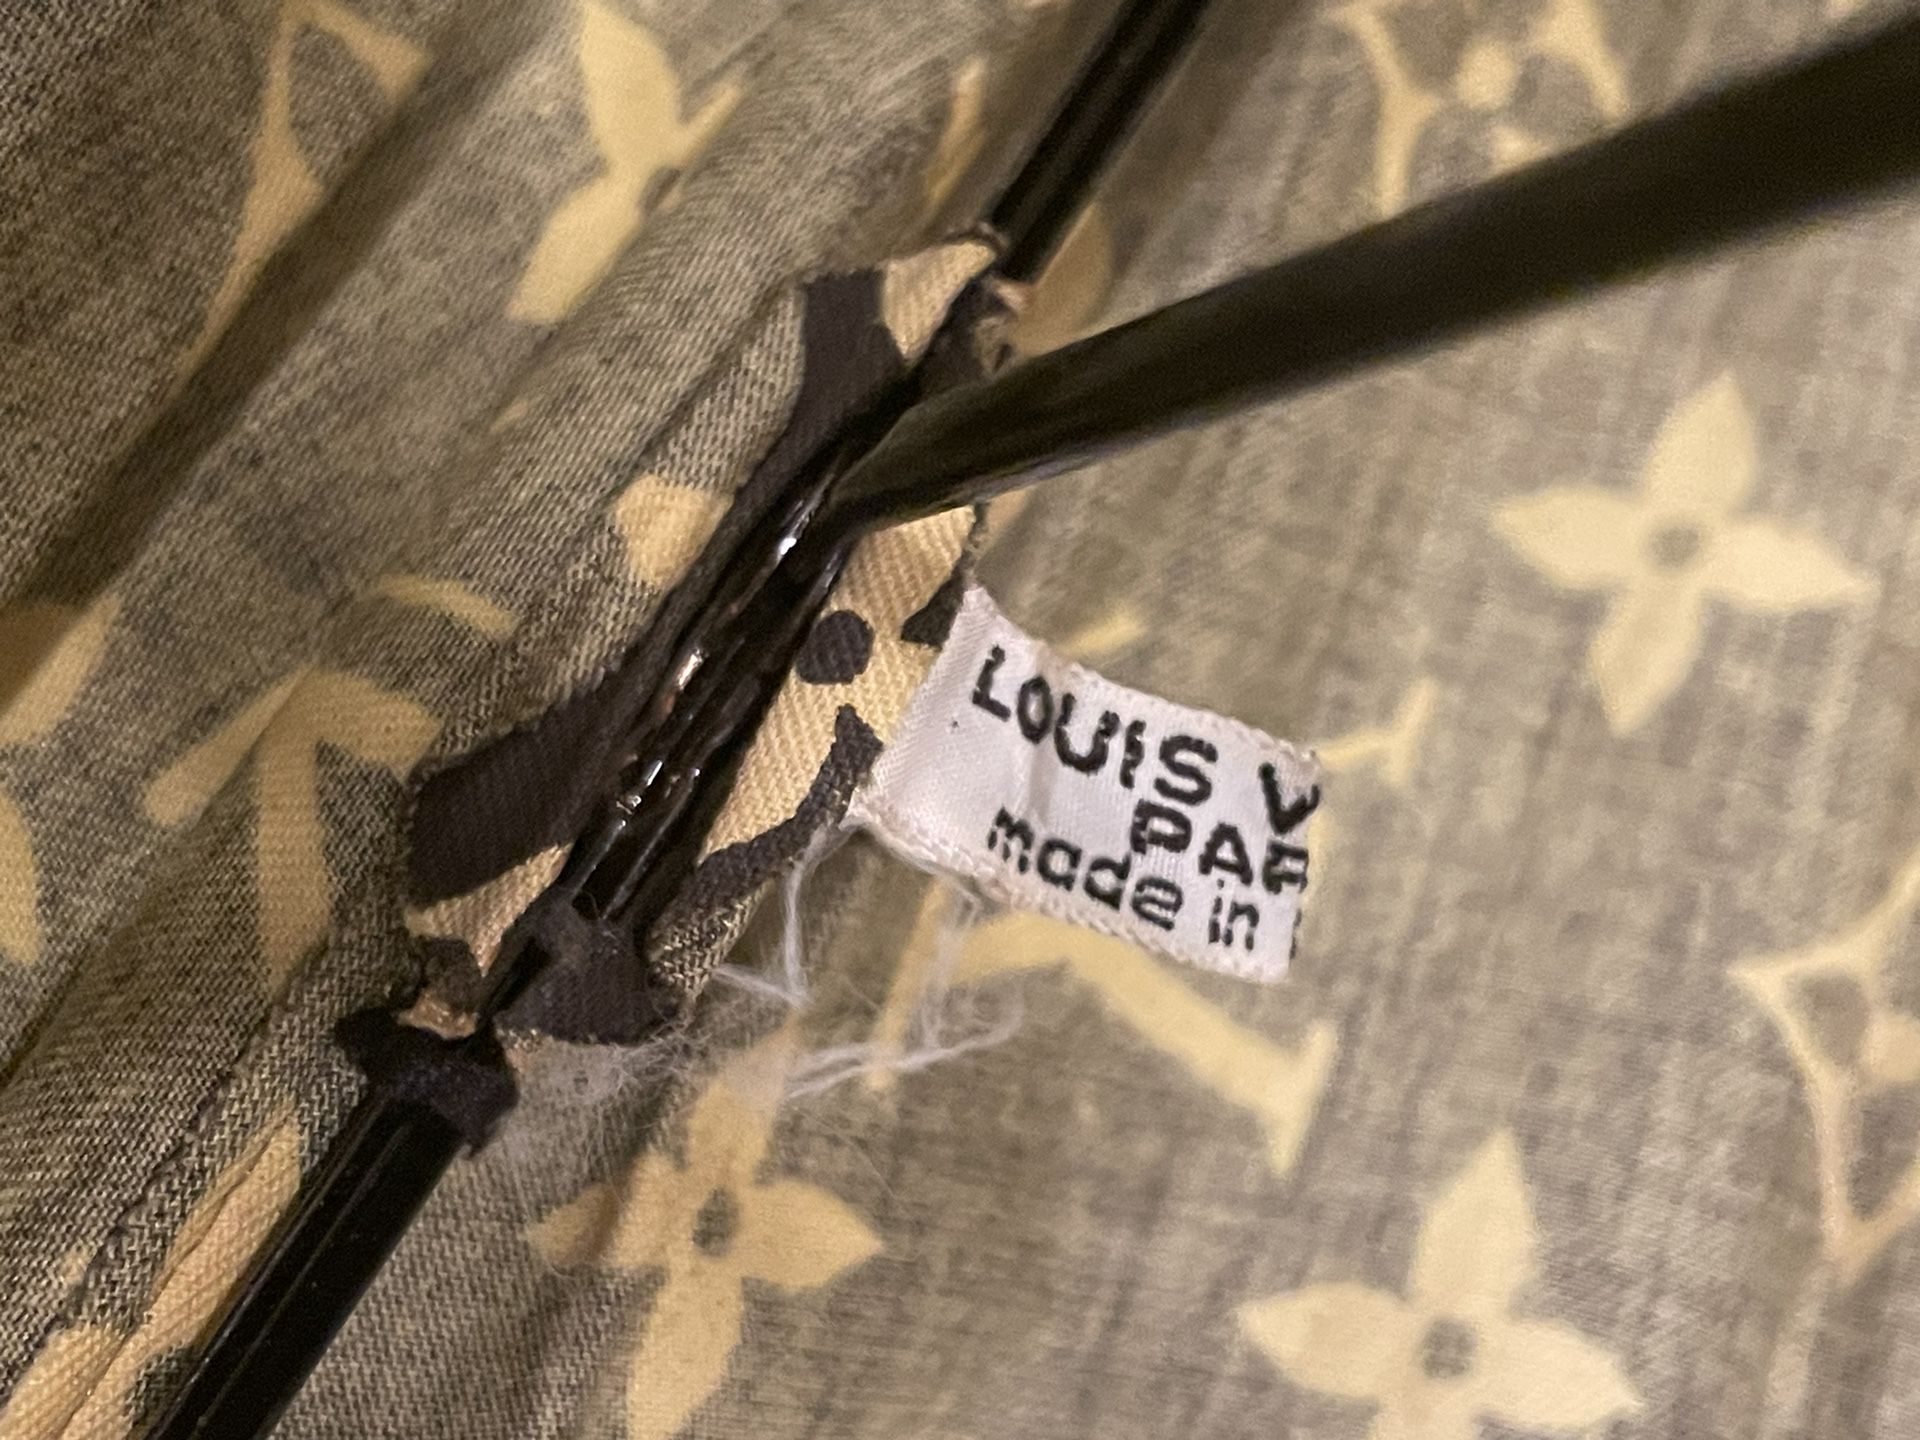 Sold at Auction: Faux Louis Vuitton Umbrella in the traditional brown  shade with logo pattern and wooden handle.